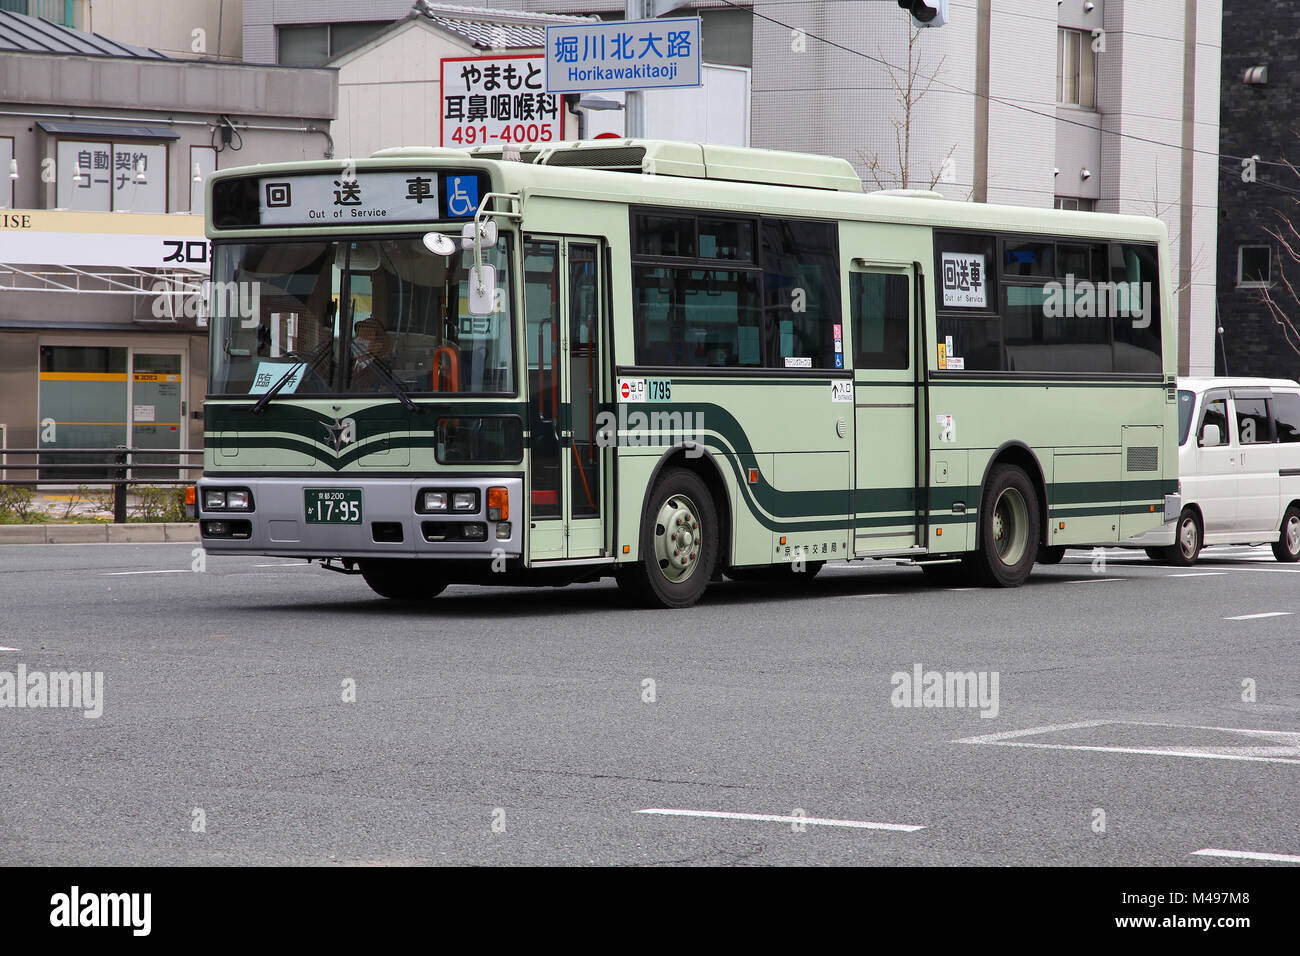 KYOTO, JAPAN - APRIL 15: Hino bus on April 15, 2012 in Kyoto, Japan. Hino Motors exists since 1942, employs 9.500 people (2008) and is part of Toyota  Stock Photo